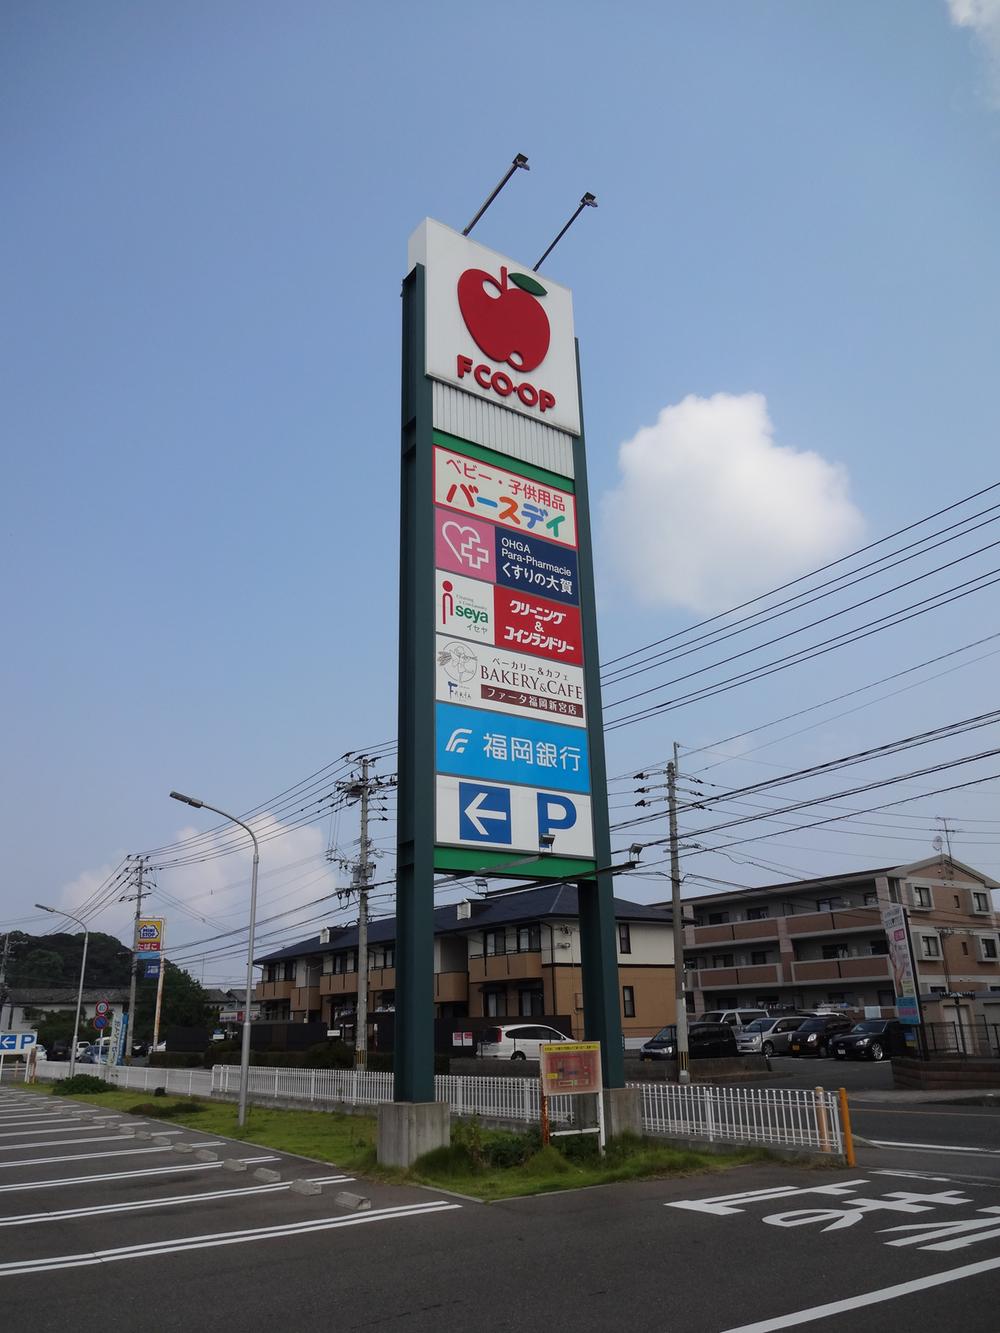 Supermarket. Efukopu ・ Oga pharmacy 340m super to like ・ A 5-minute walk from the pharmacy! Convenient living environment in the shopping facilities are enriched.